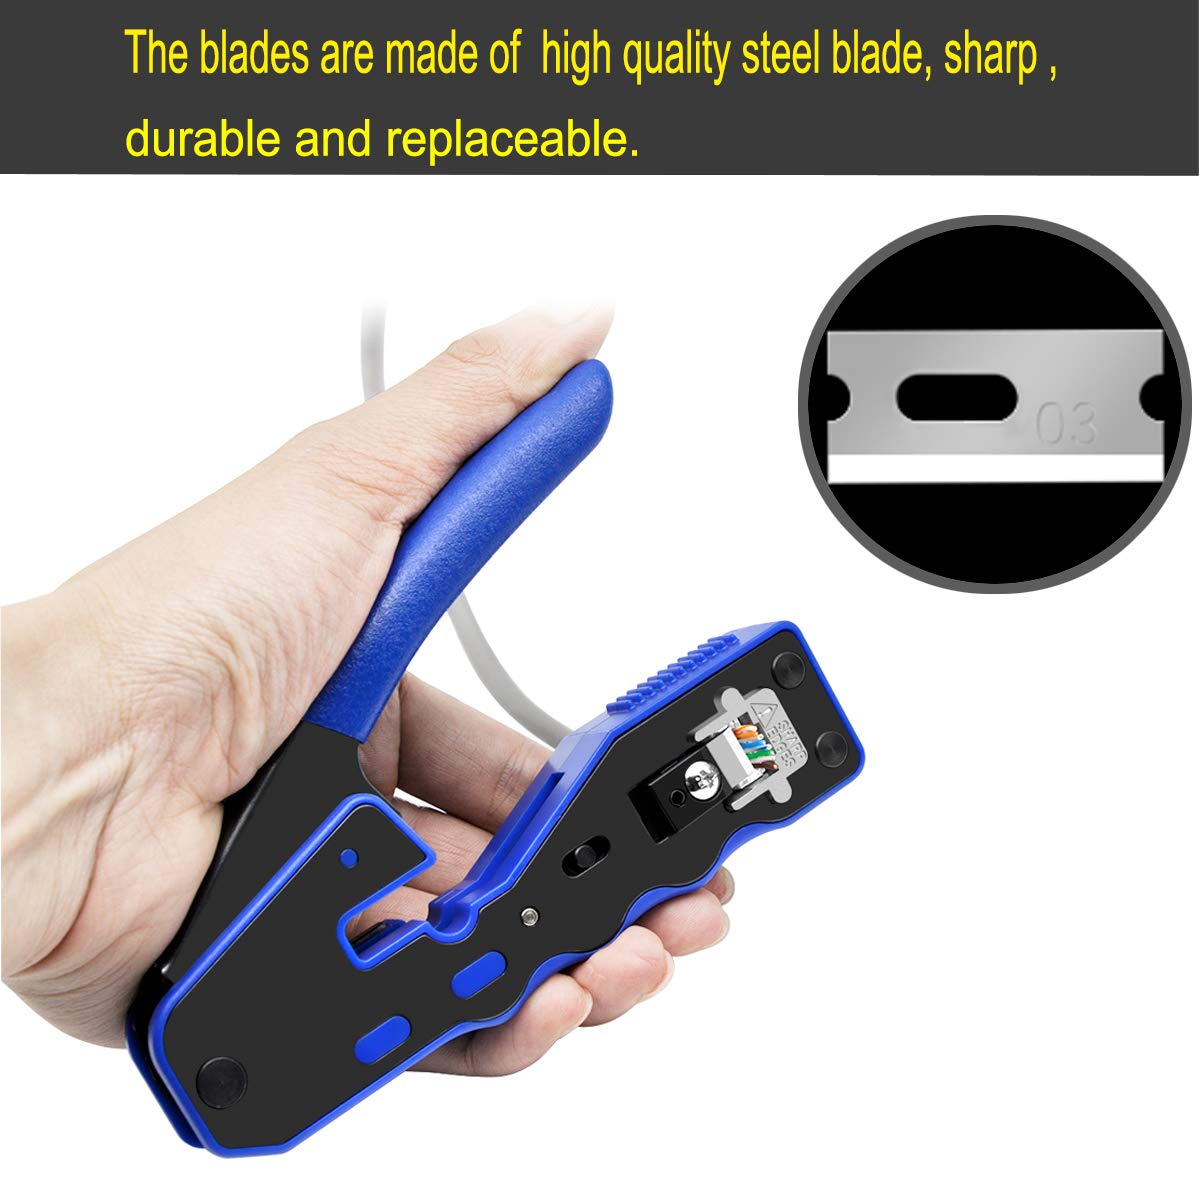 RJ45 Crimp Tool Kit All-in-one Ethernet Crimping Tool Wire Crimper Stripper Cutter for Cat5e Cat6 Cat6a Pass Thrugh Connectors with 10 pieces Cat6 Connectors and 1 piece mini wire stripper